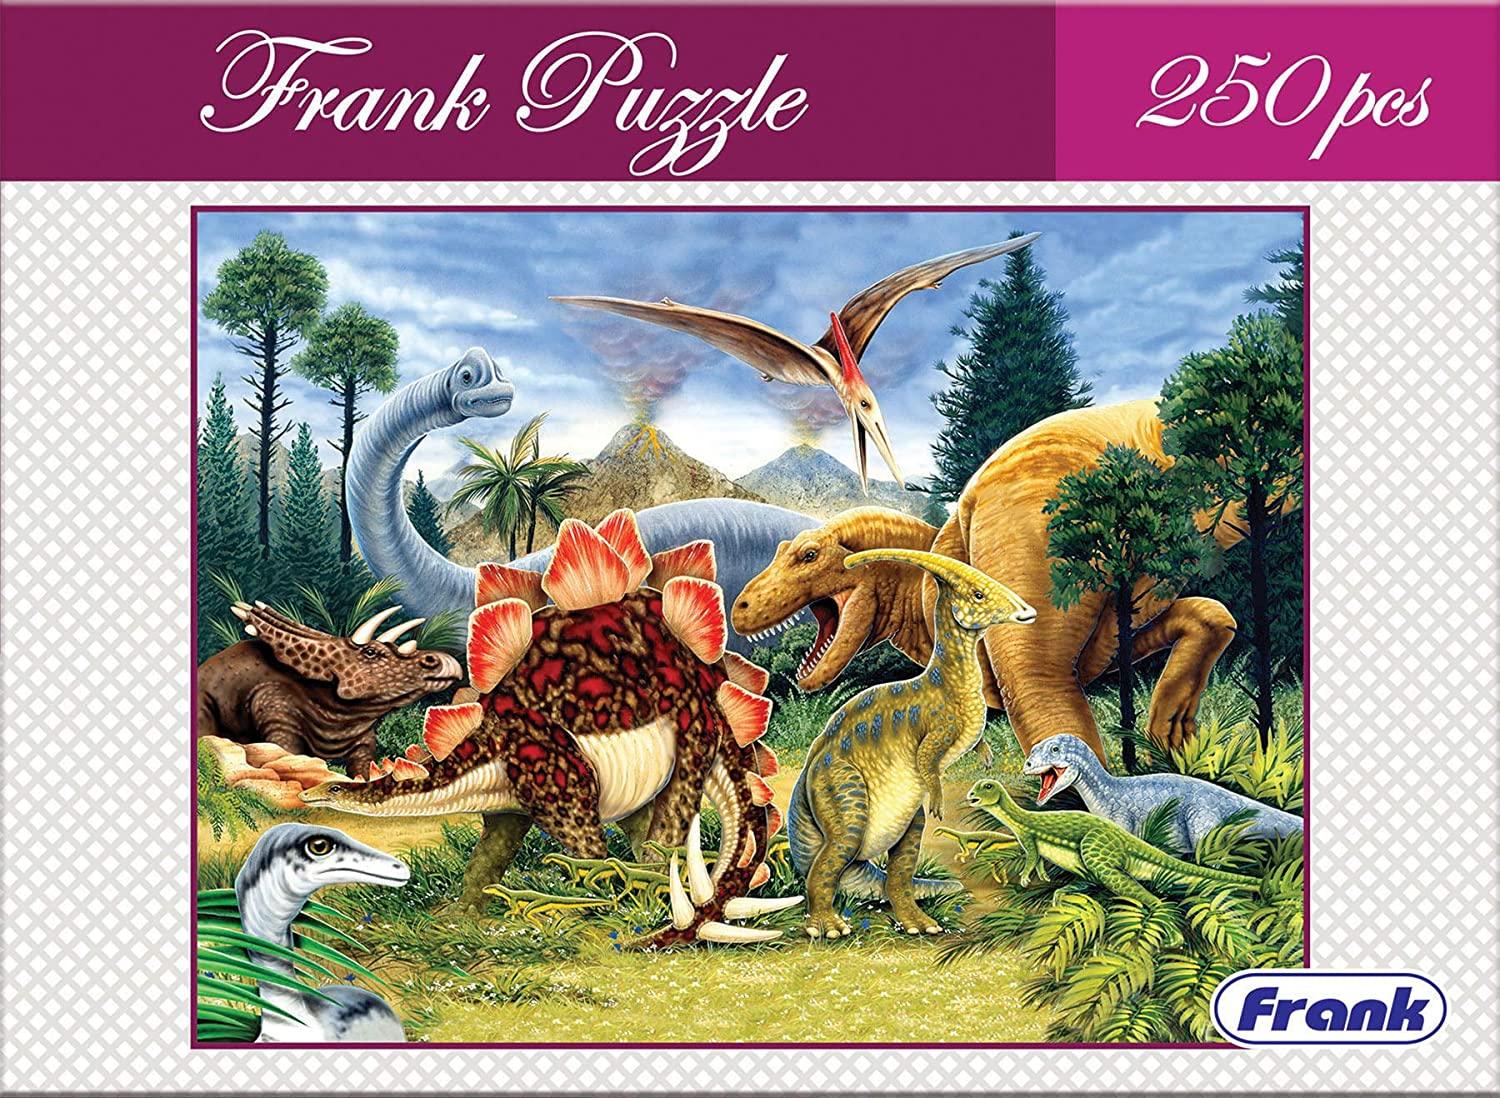 Frank Dinosaur Country 250 Pieces Jigsaw Puzzle for 9 Years and Above